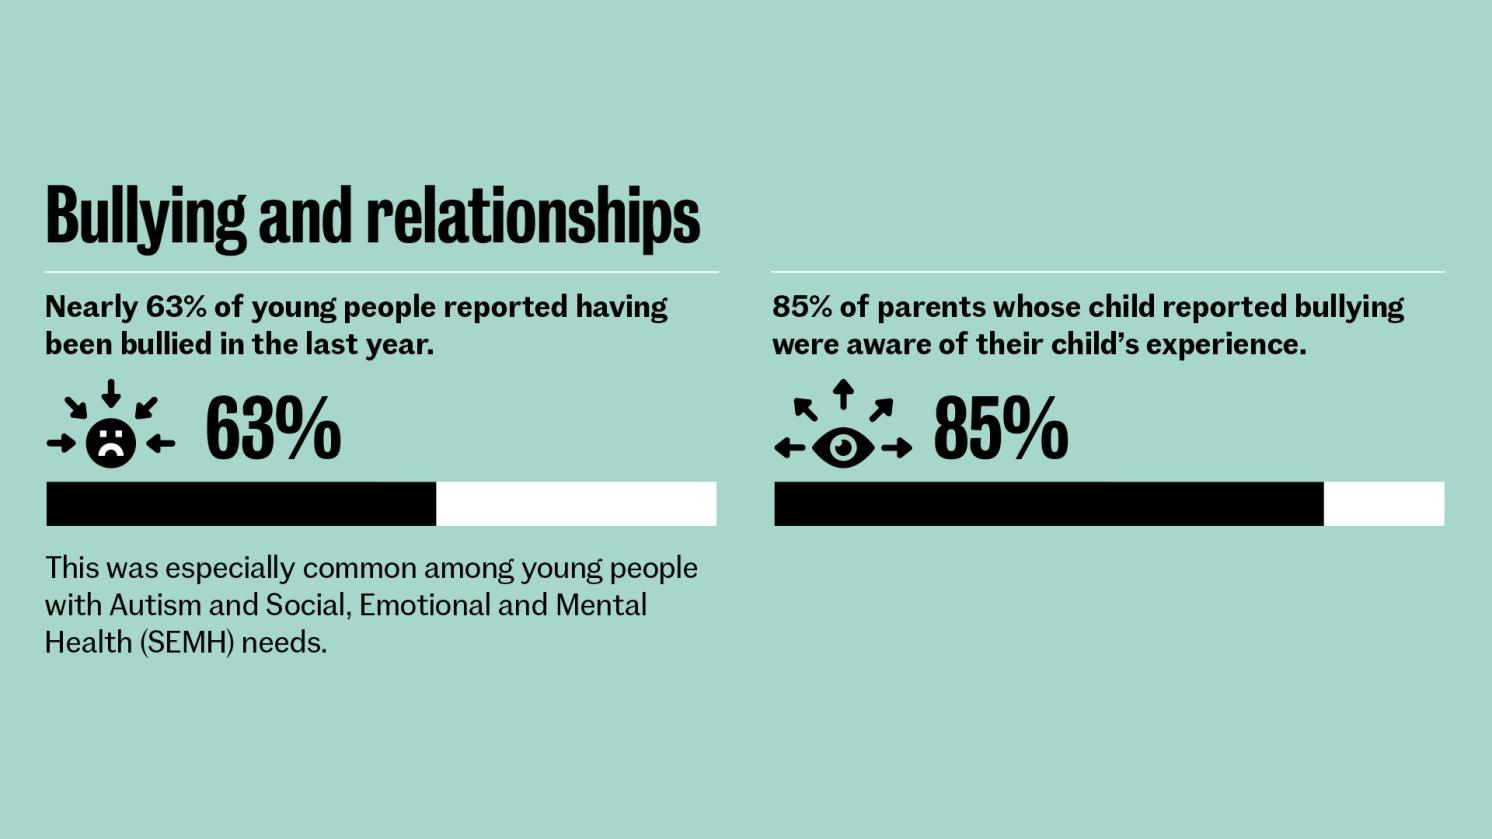 Infographic relating to findings on bullying and relationships